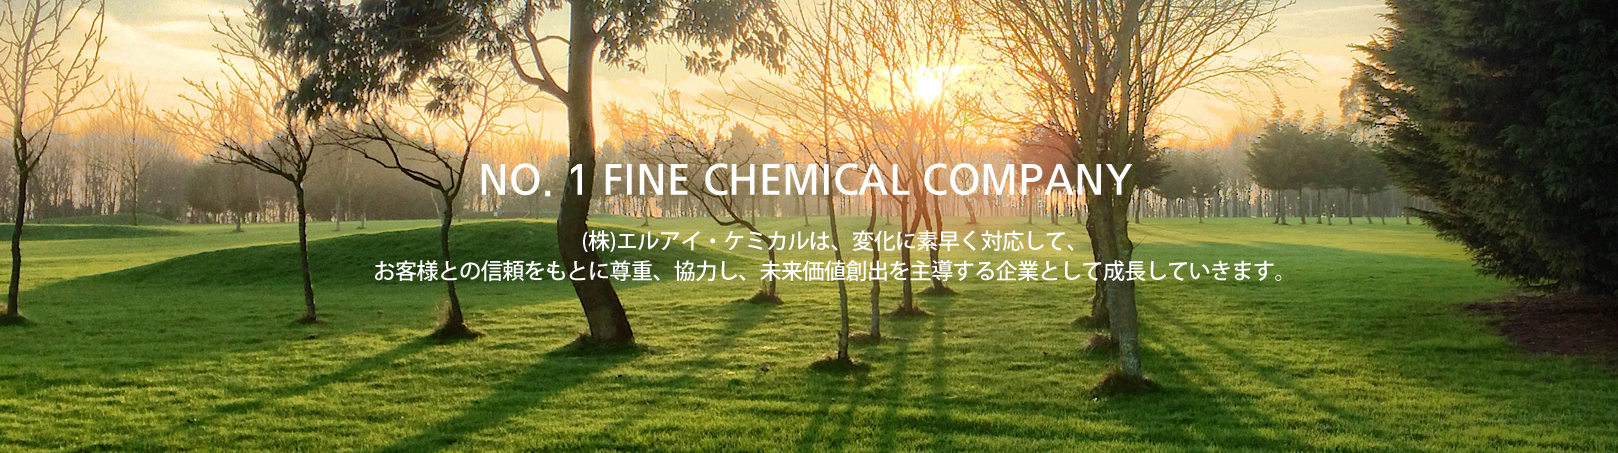 NO. 1 FINE CHEMICAL COMPANY - LI Chemical will be a leader in creating future values by respecting and cooperating with each other on the basis of reliability for customers and quick reaction to changes in the industry.